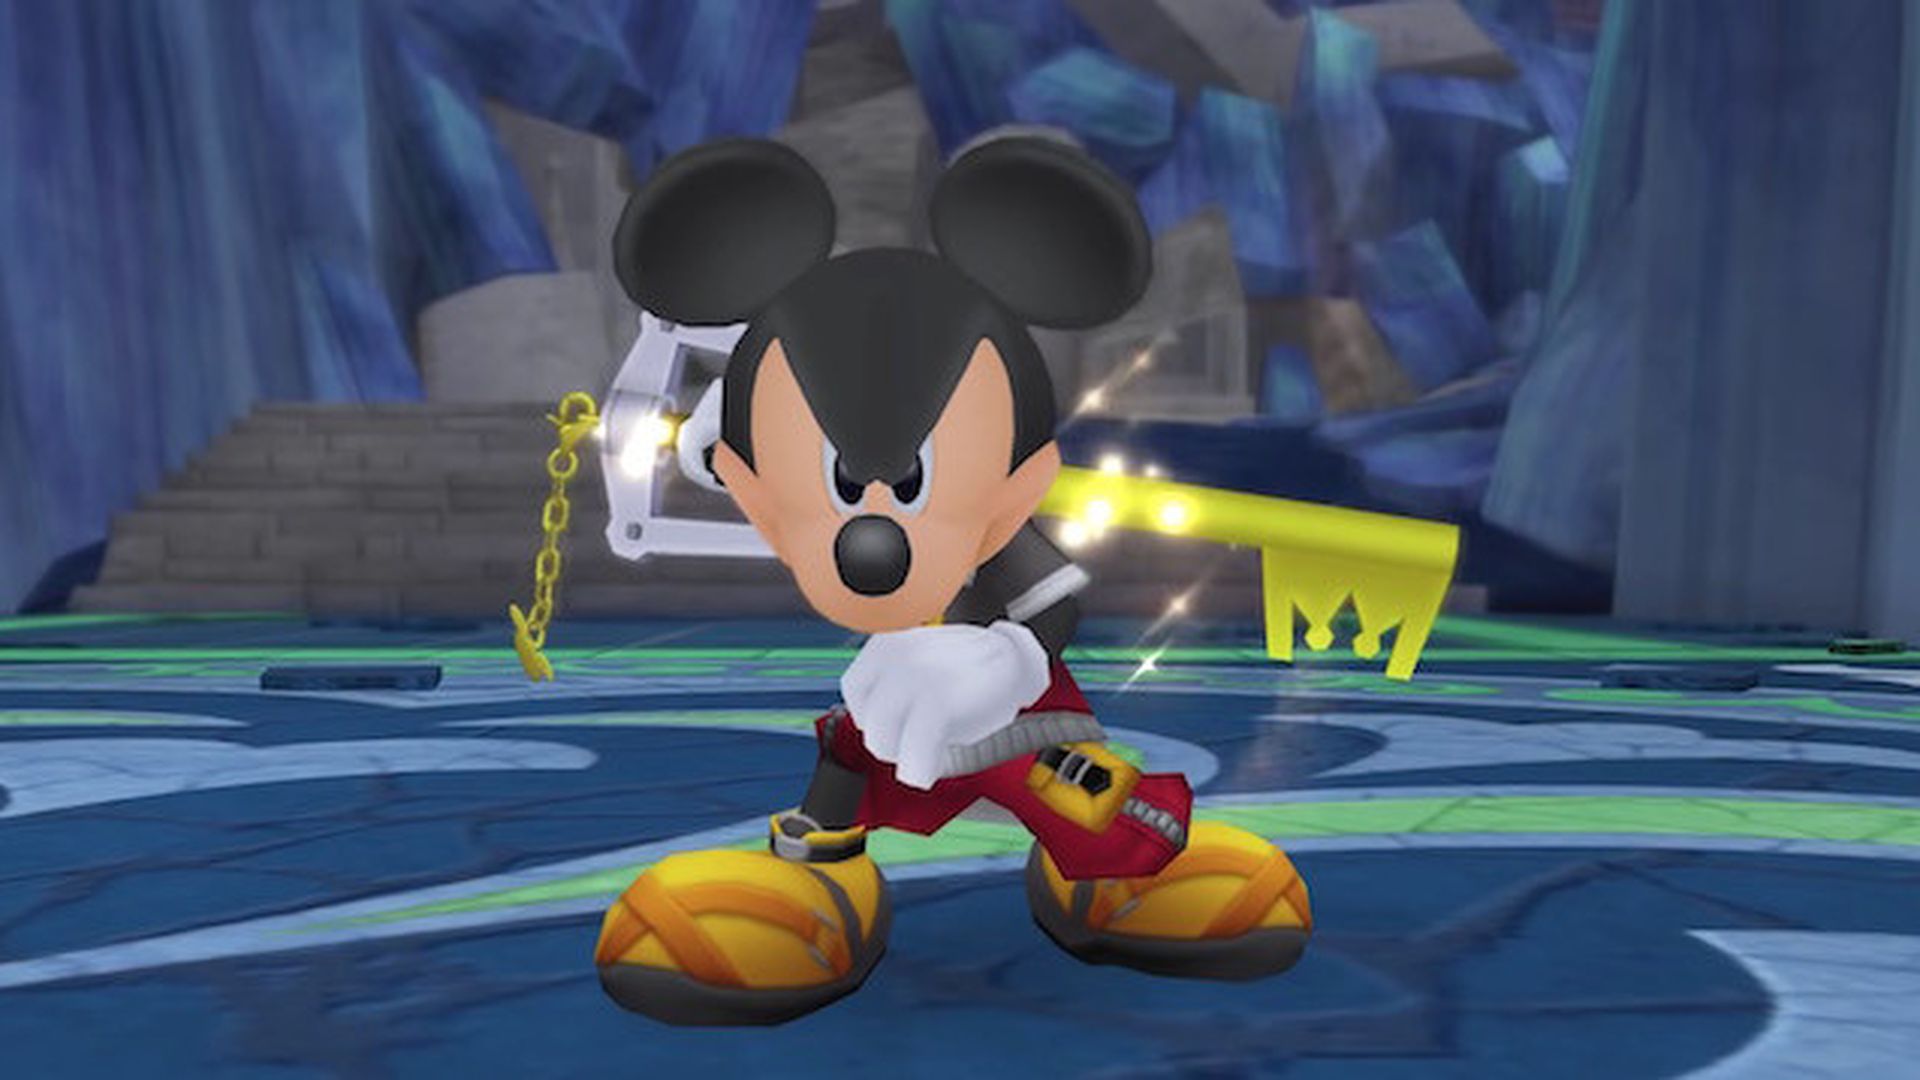 kingdom-hearts-why-mickey-mouse-only-had-a-cameo-in-the-first-game-the-dark-carnival